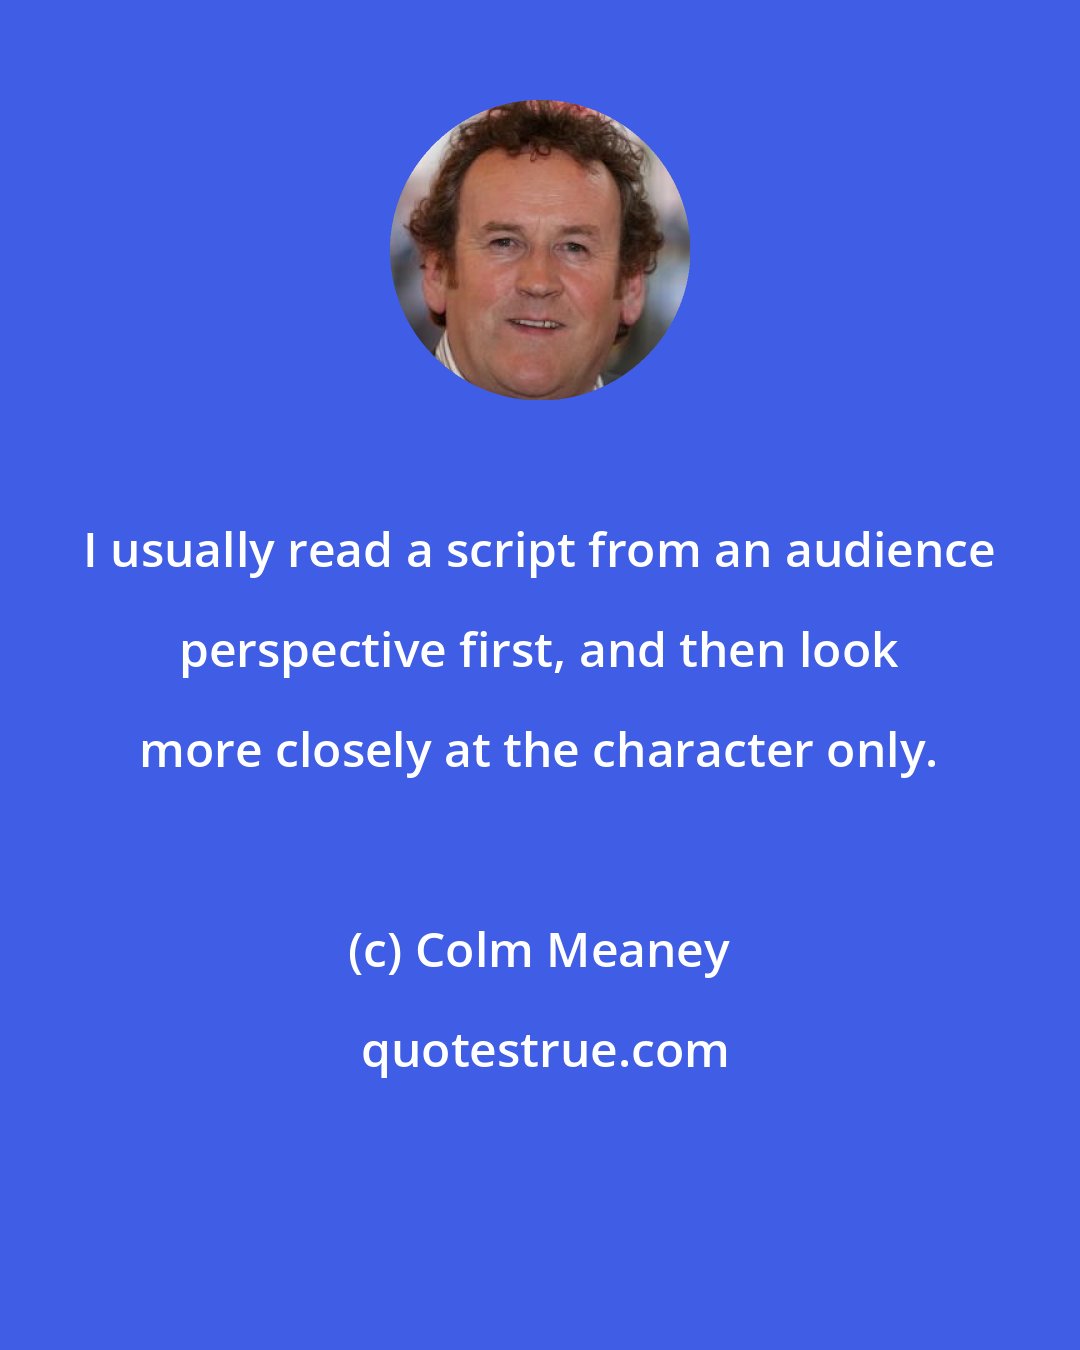 Colm Meaney: I usually read a script from an audience perspective first, and then look more closely at the character only.